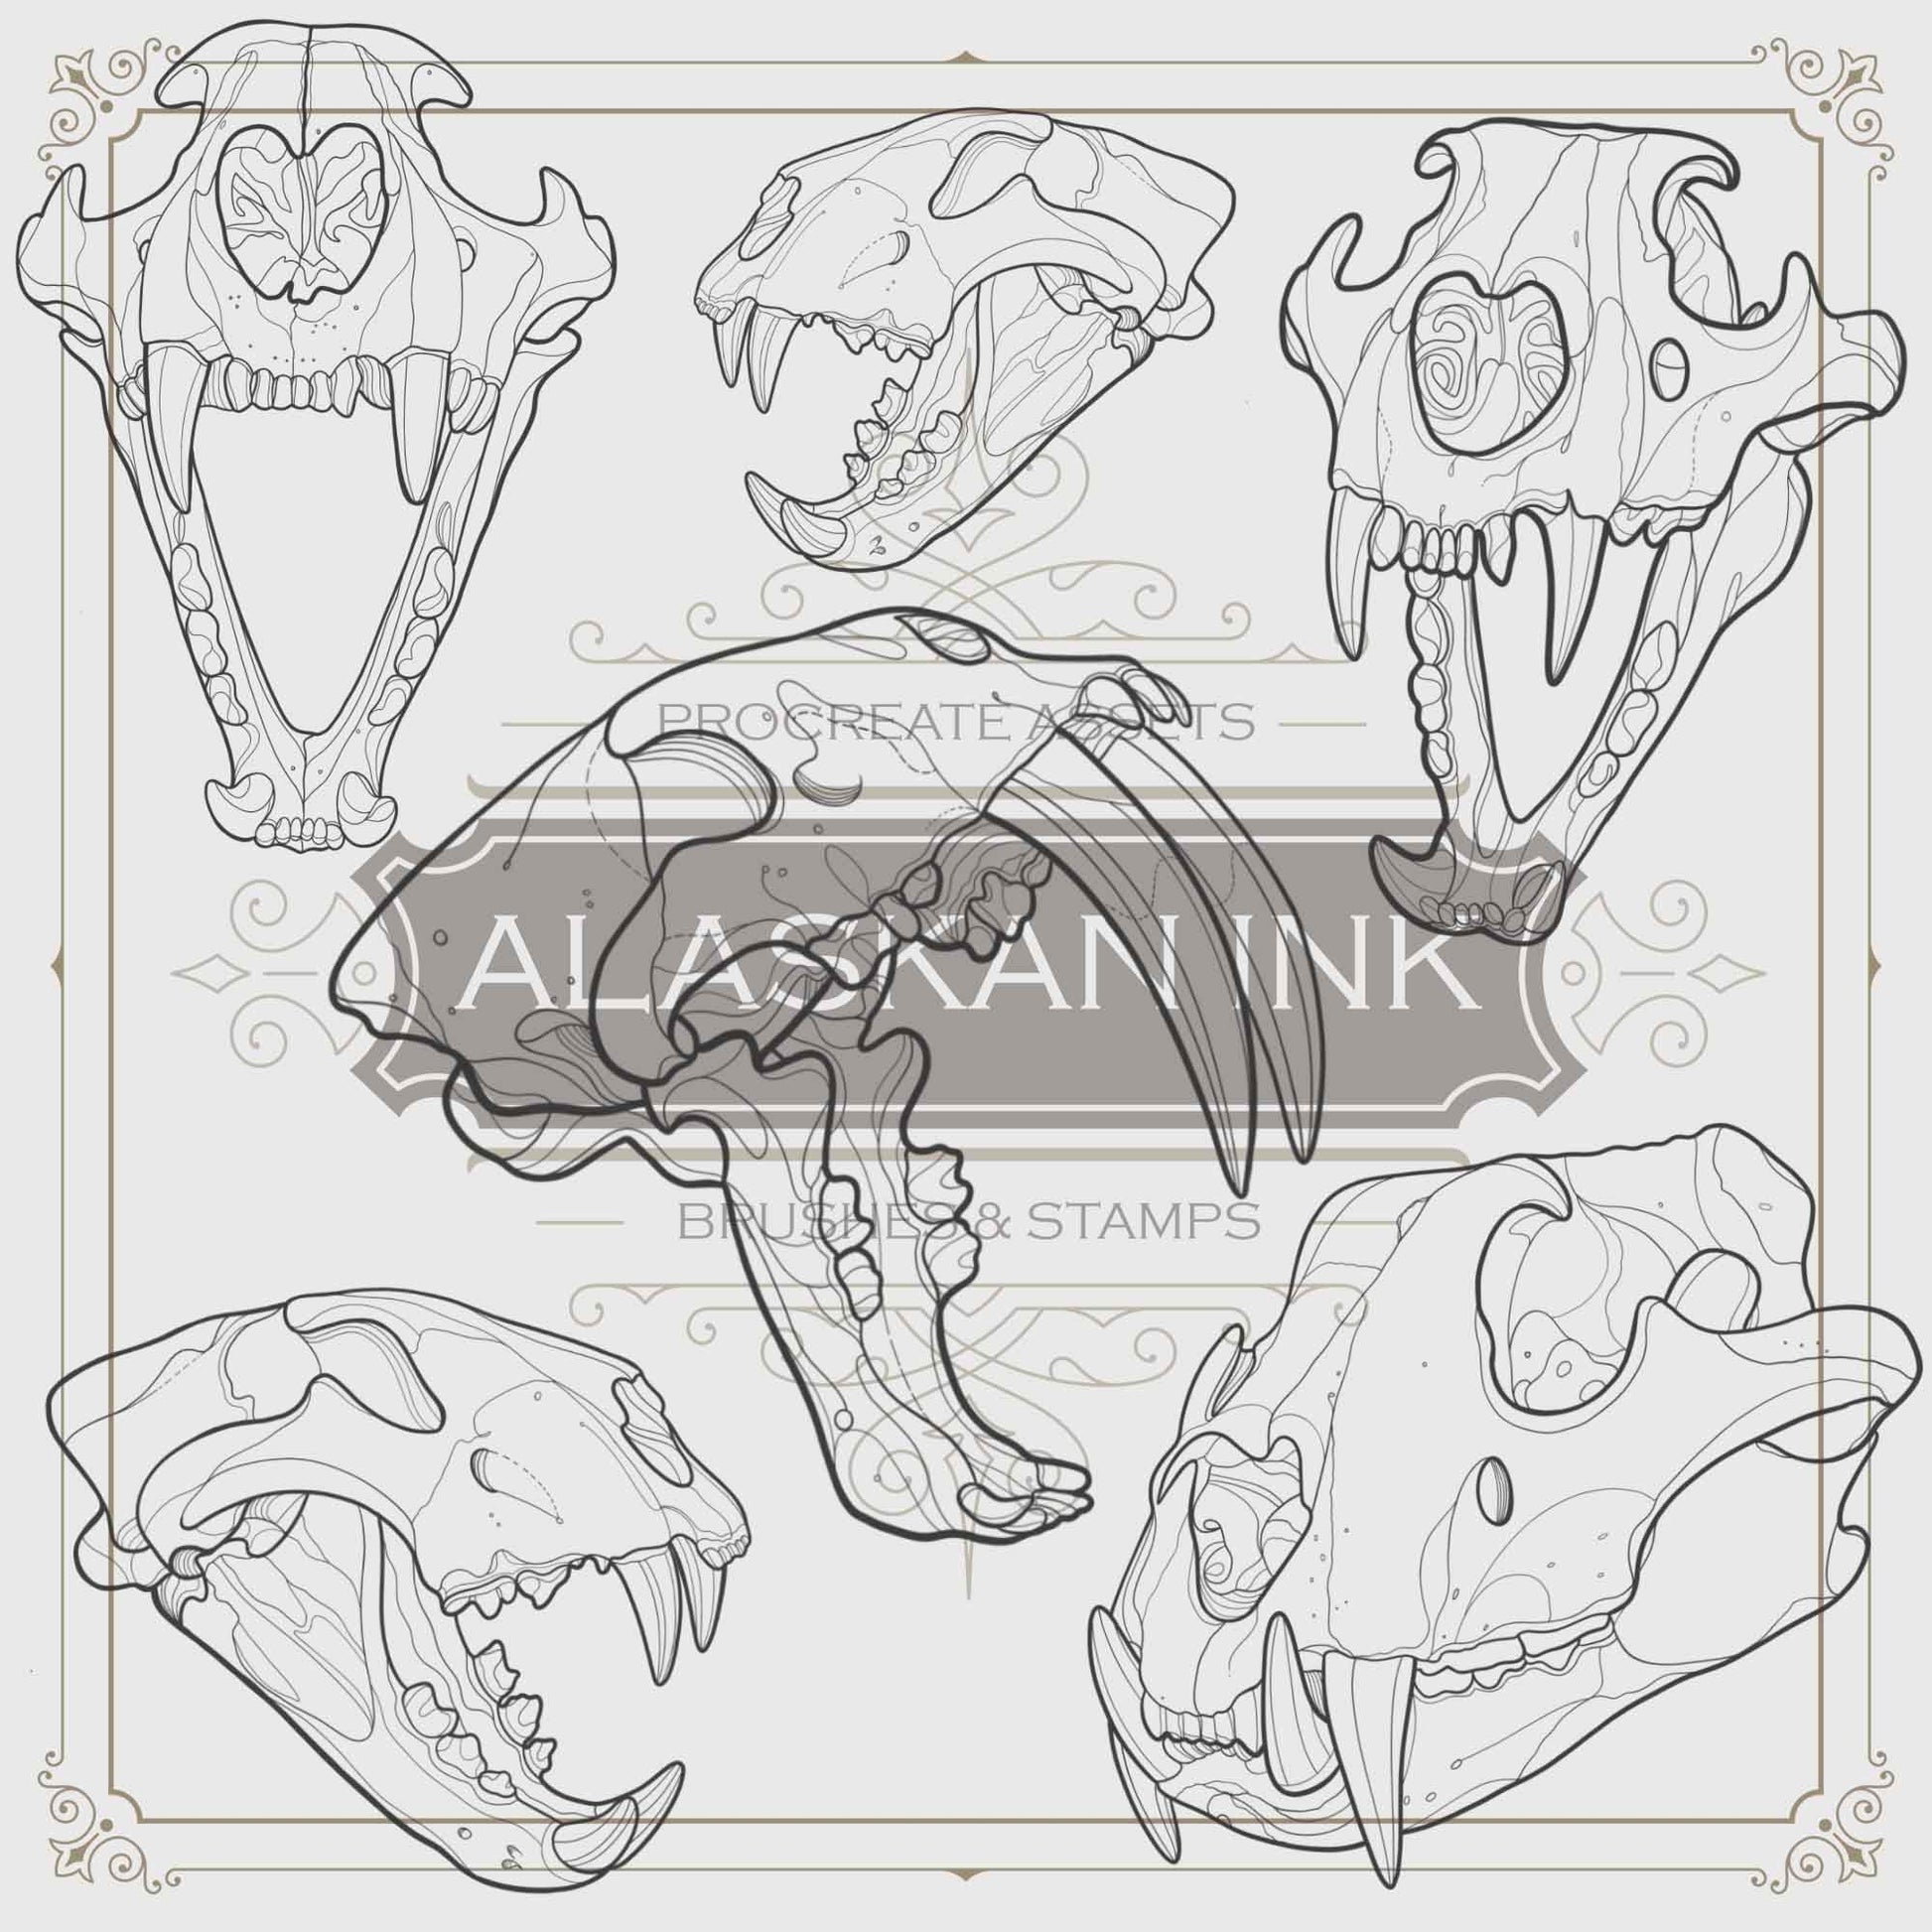 40 Animal Skulls Tattoo Brushes & Stamps for Procreate application created by Alaskan ink